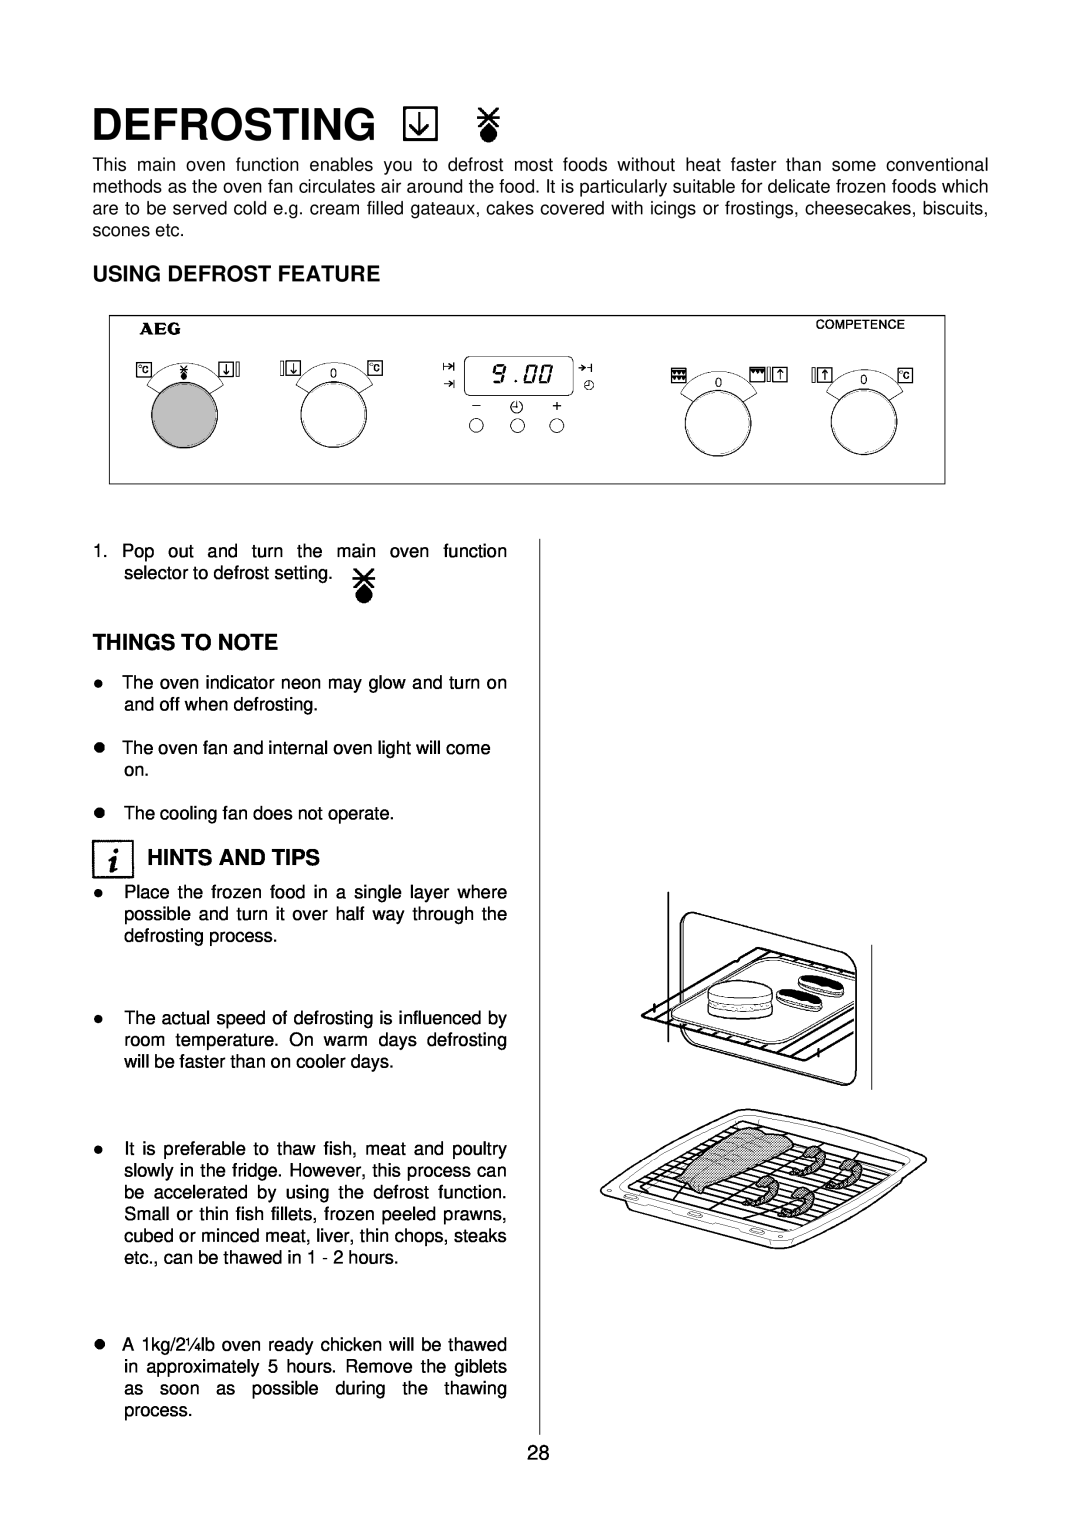 Electrolux D4100-1 operating instructions Defrosting, Using Defrost Feature, Things To Note, Hints And Tips 